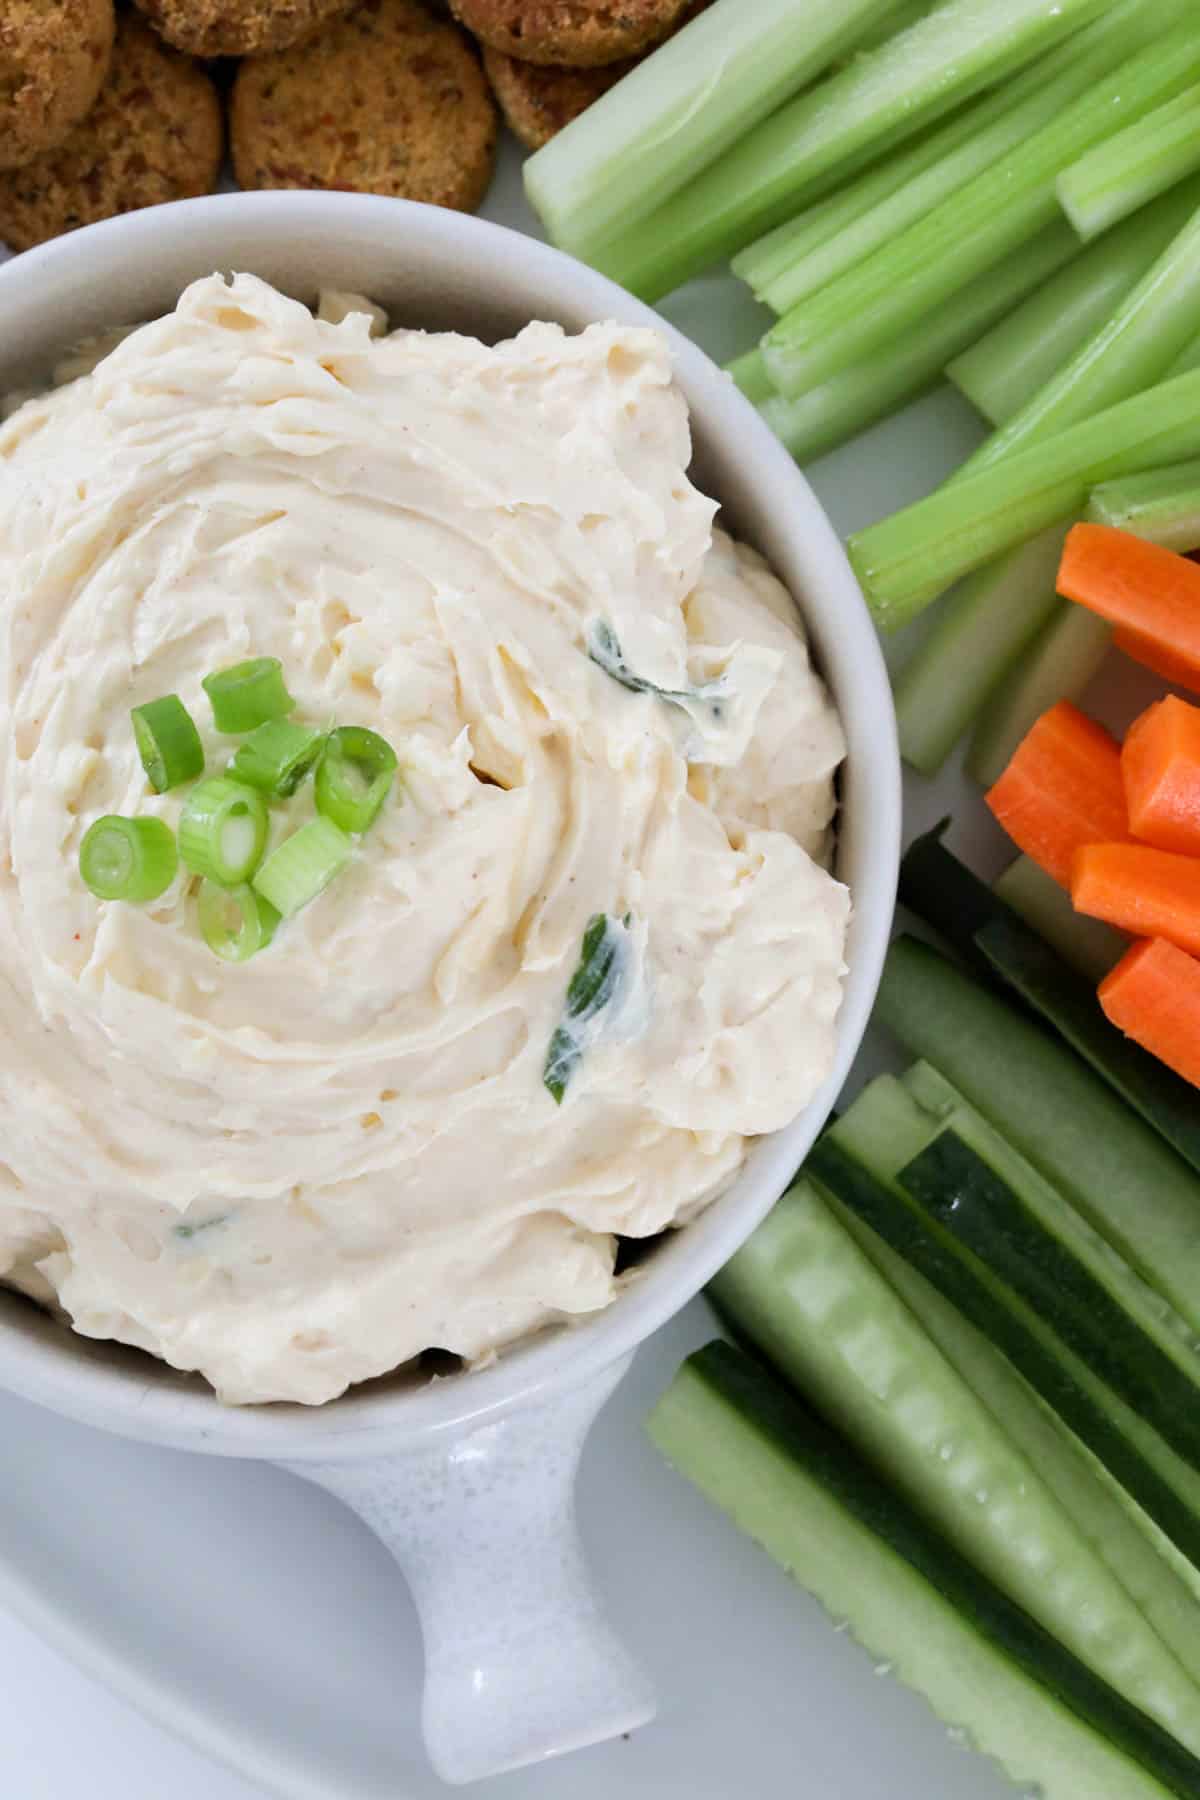 Carrot, cucmber and celery sticks placed around a small white bowl of dip.